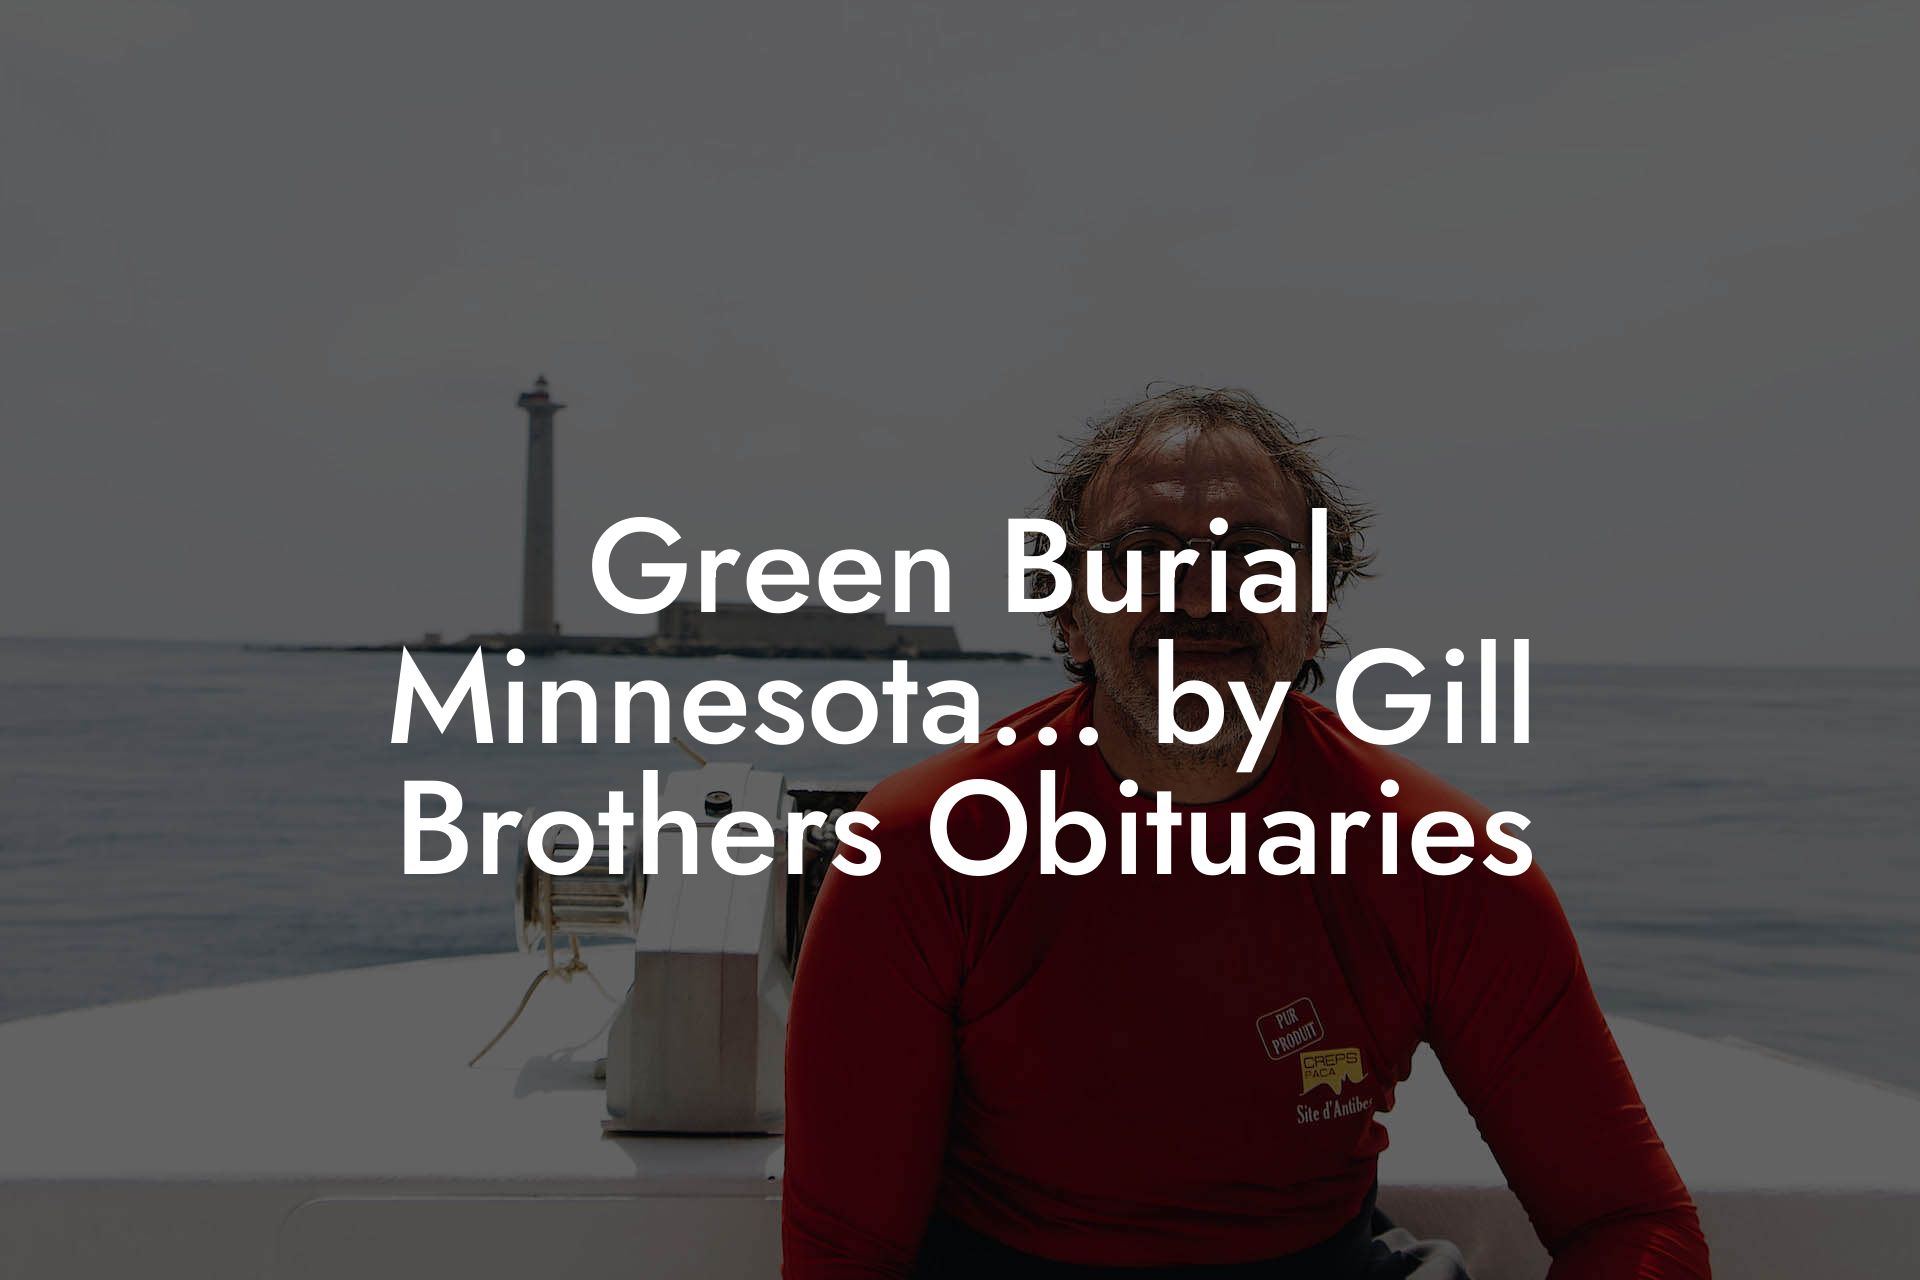 Green Burial Minnesota... by Gill Brothers Obituaries